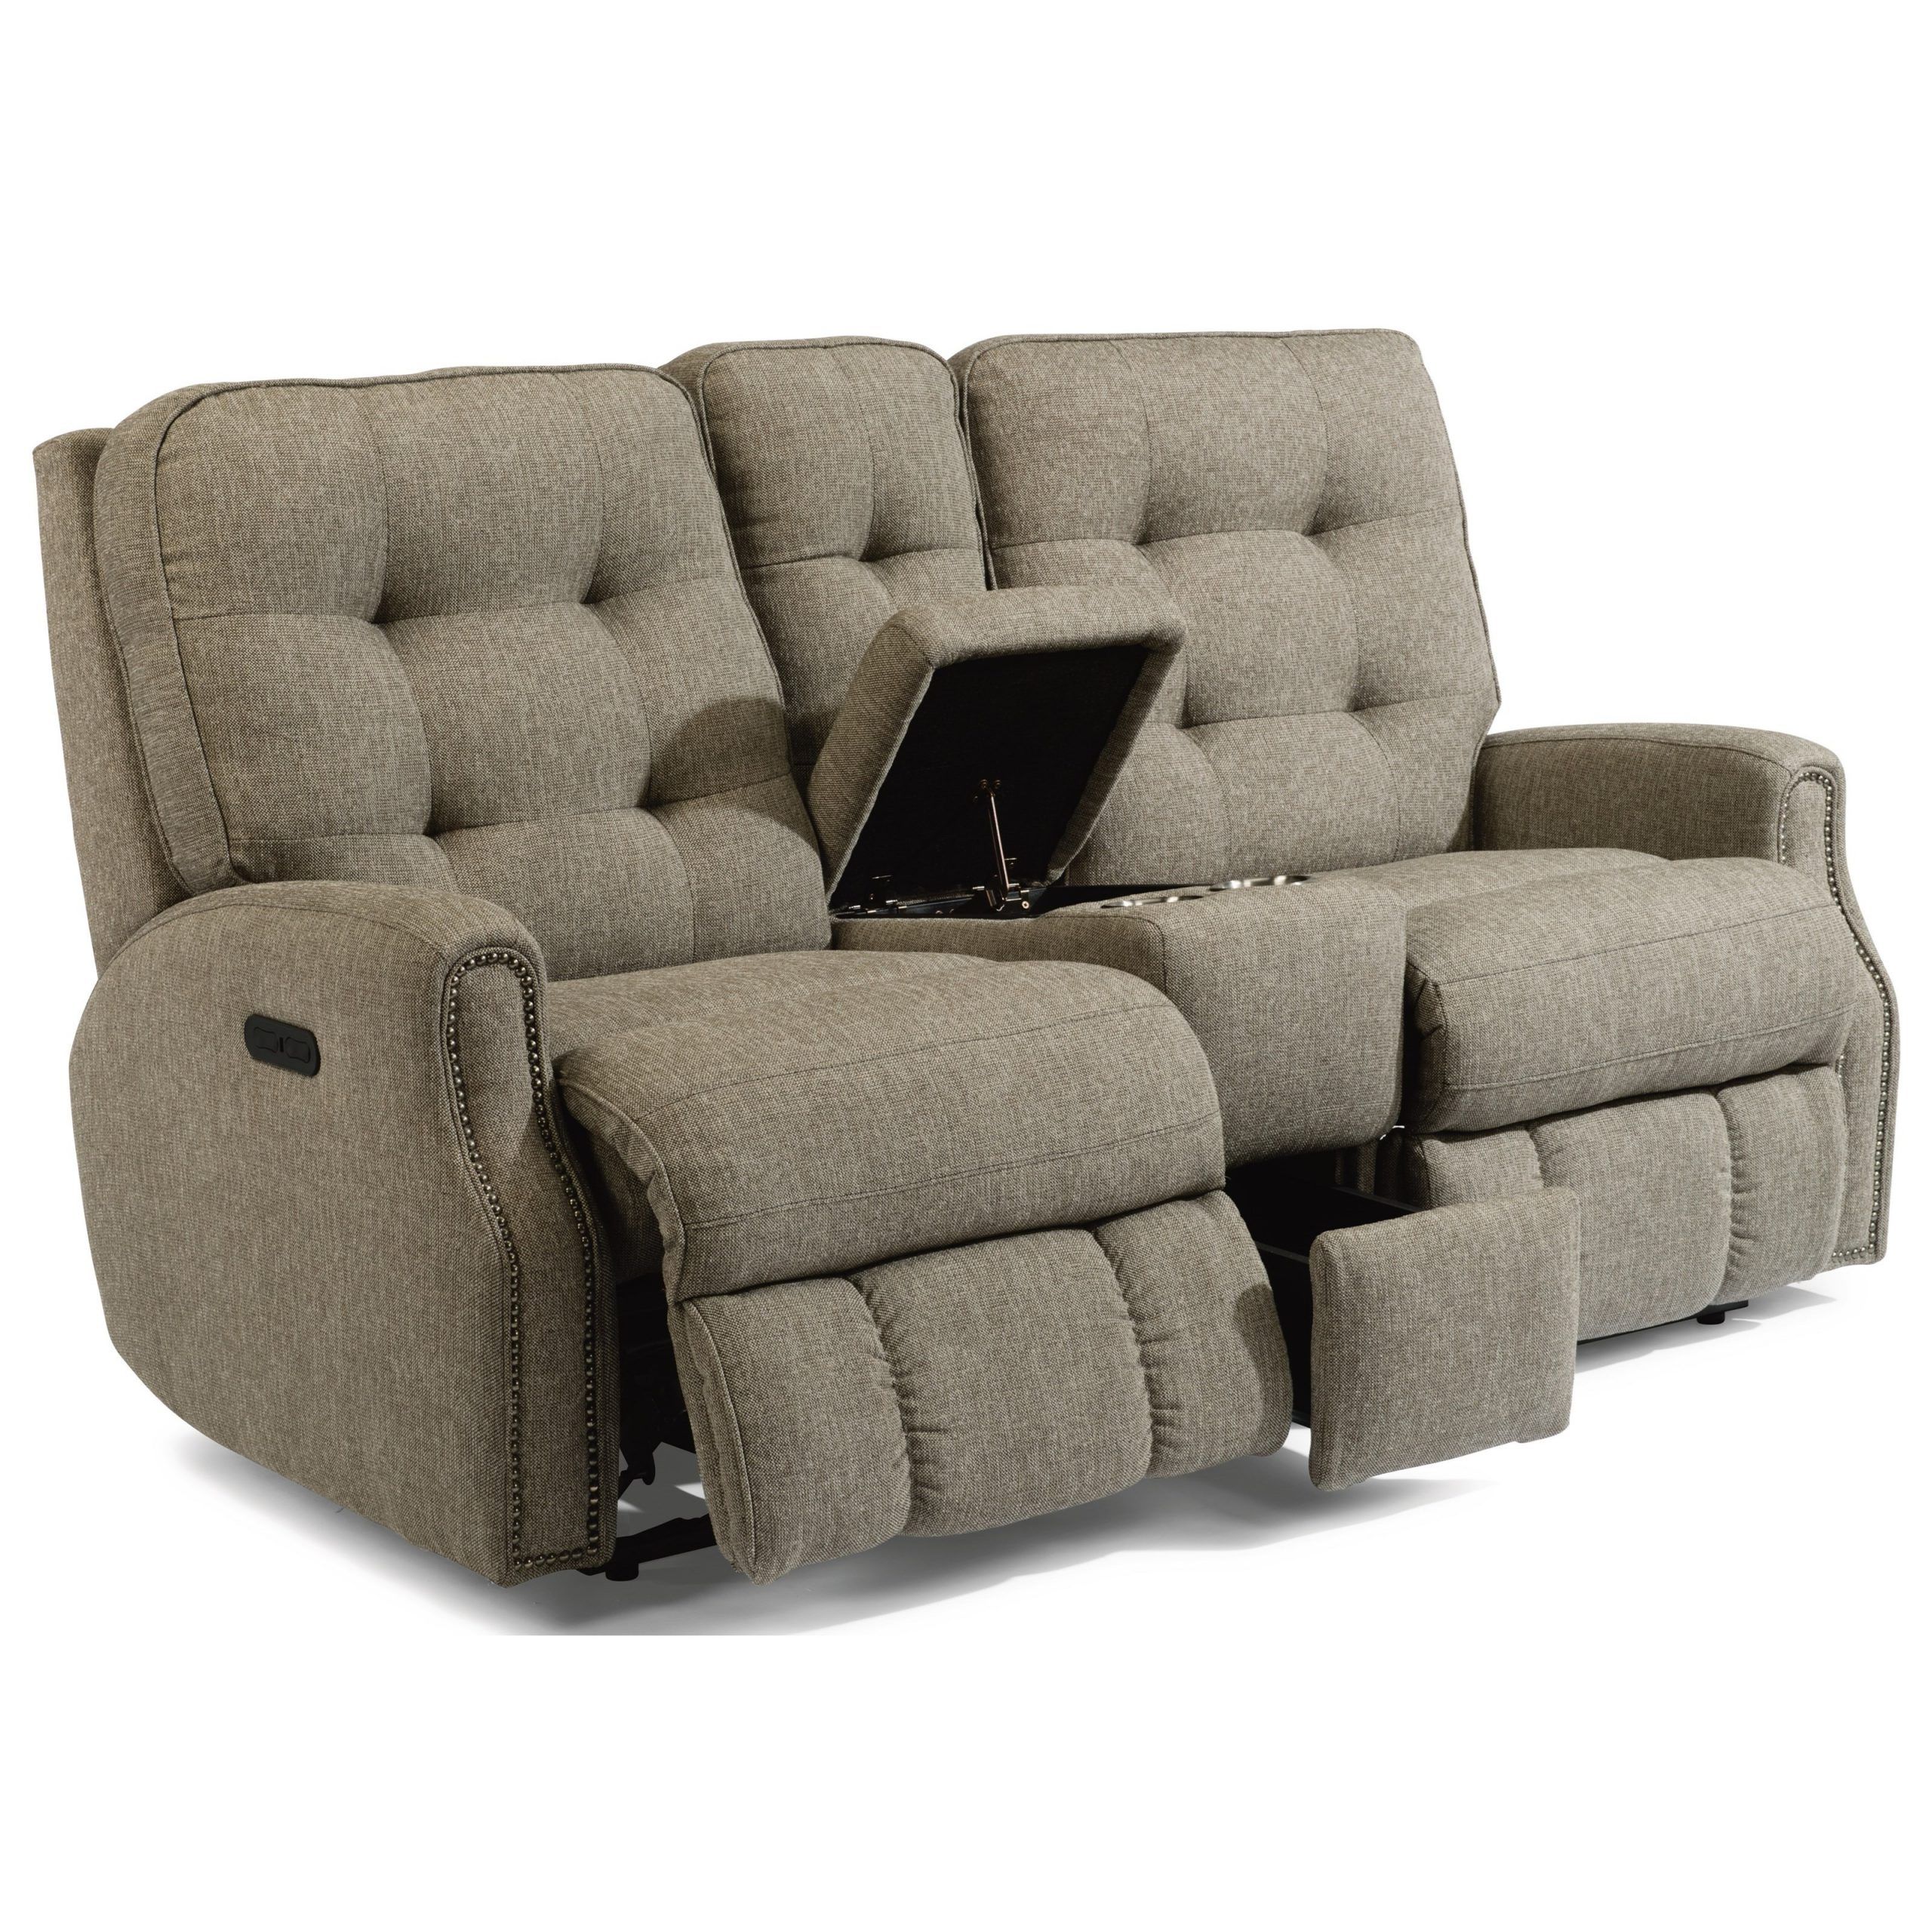 Flexsteel Devon Button Tufted Power Reclining Loveseat With Regard To Expedition Brown Power Reclining Sofas (View 13 of 15)